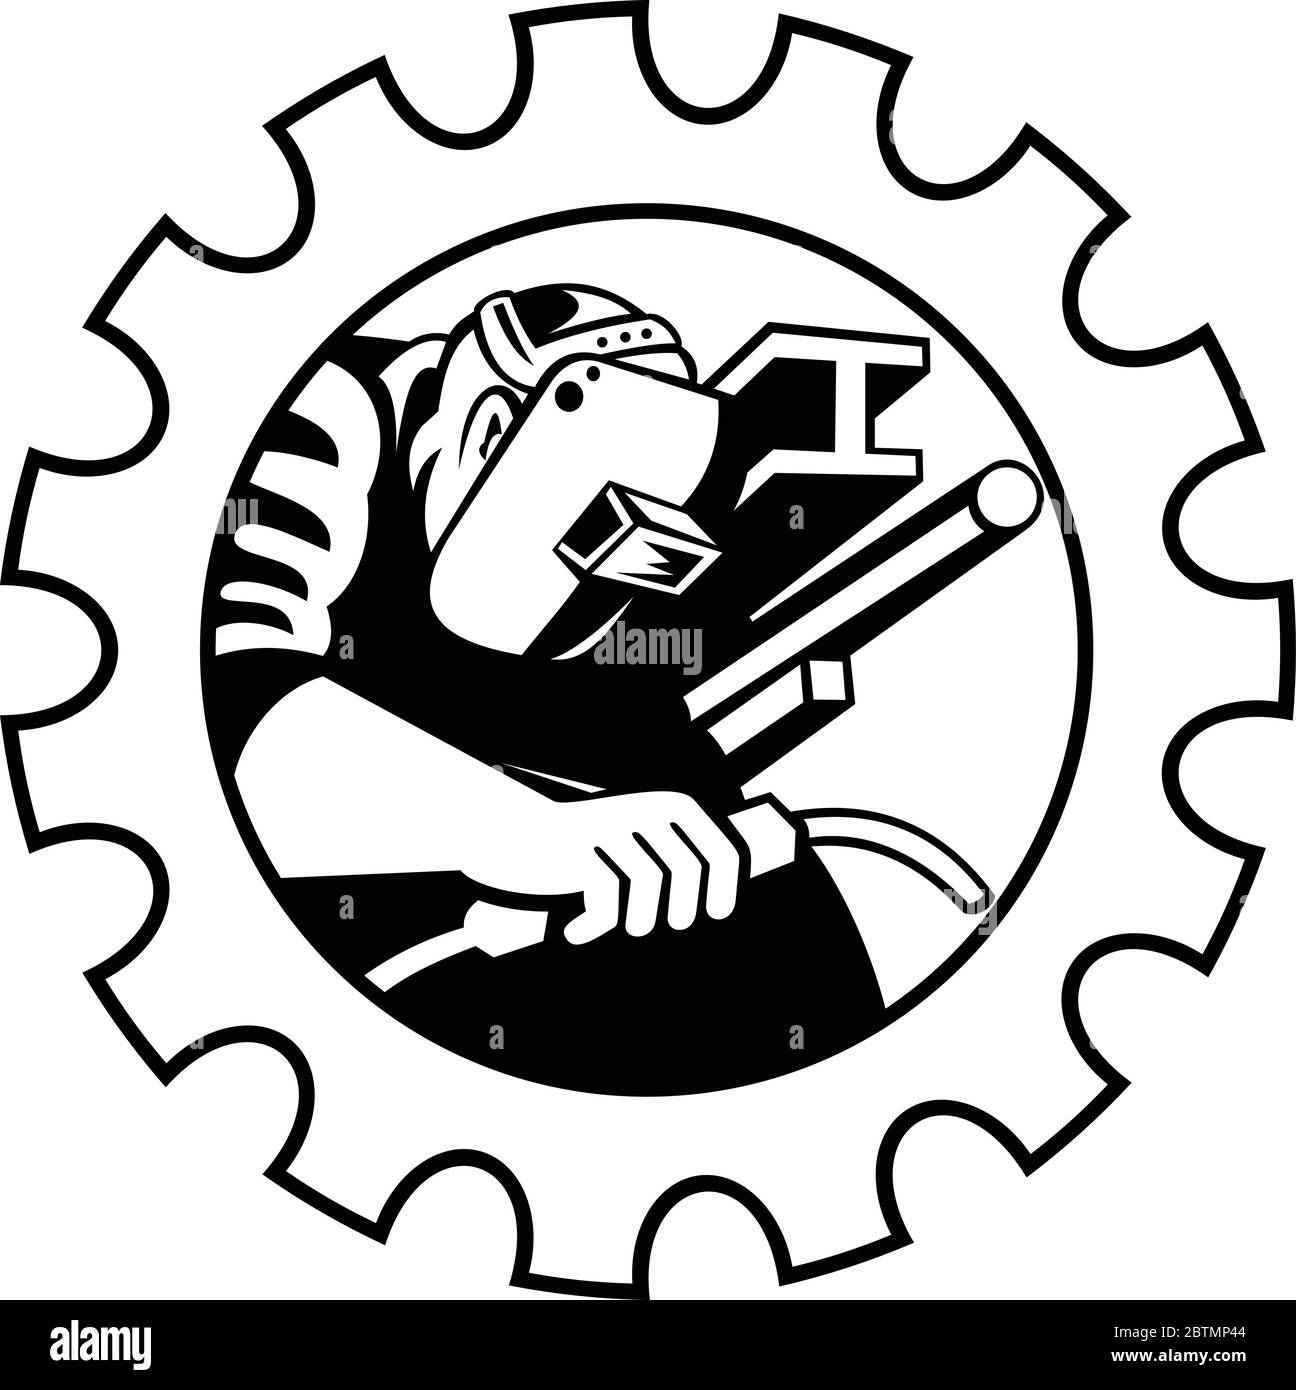 Illustration of a welder fabricator worker welding torch with i-beam pipe and bar set inside gear done in retro Black and White style. Stock Vector